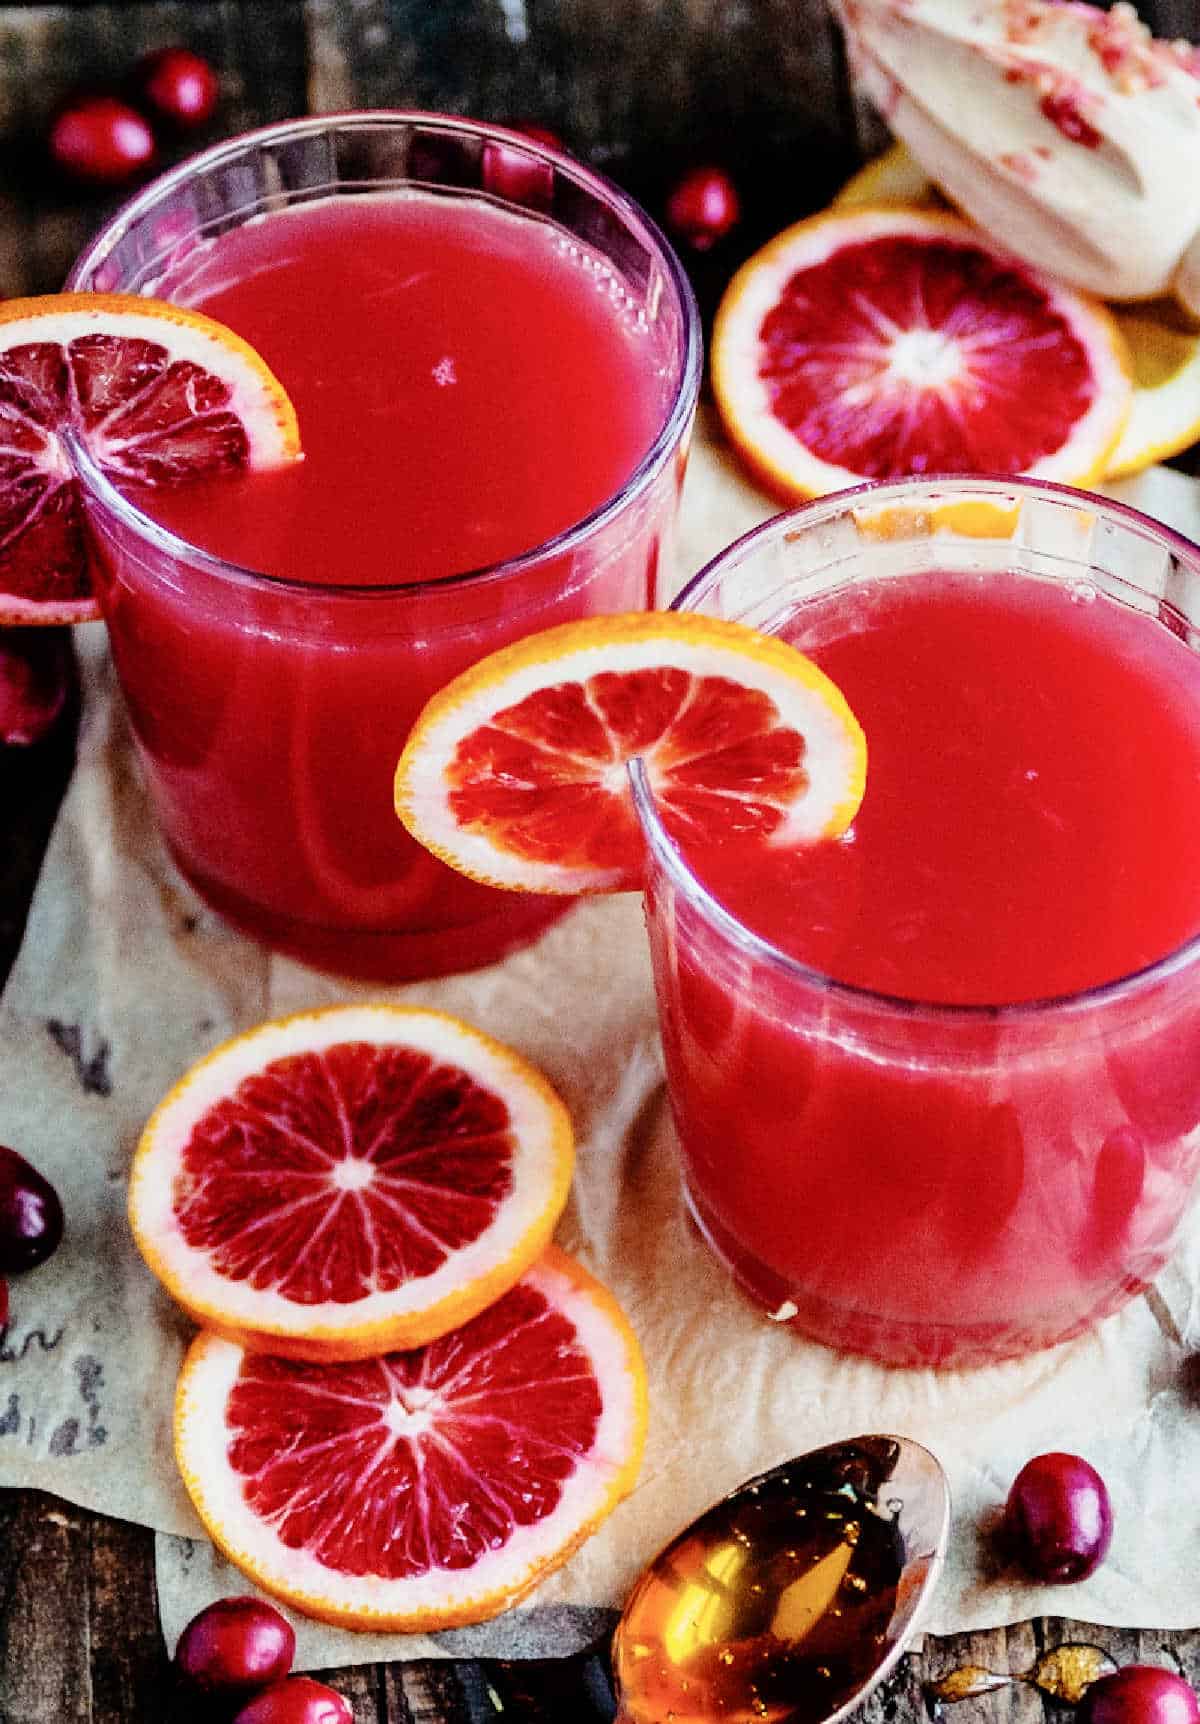 Orange slices and cranberries around two glasses with cranberry orange cocktail on a white and wood surface.